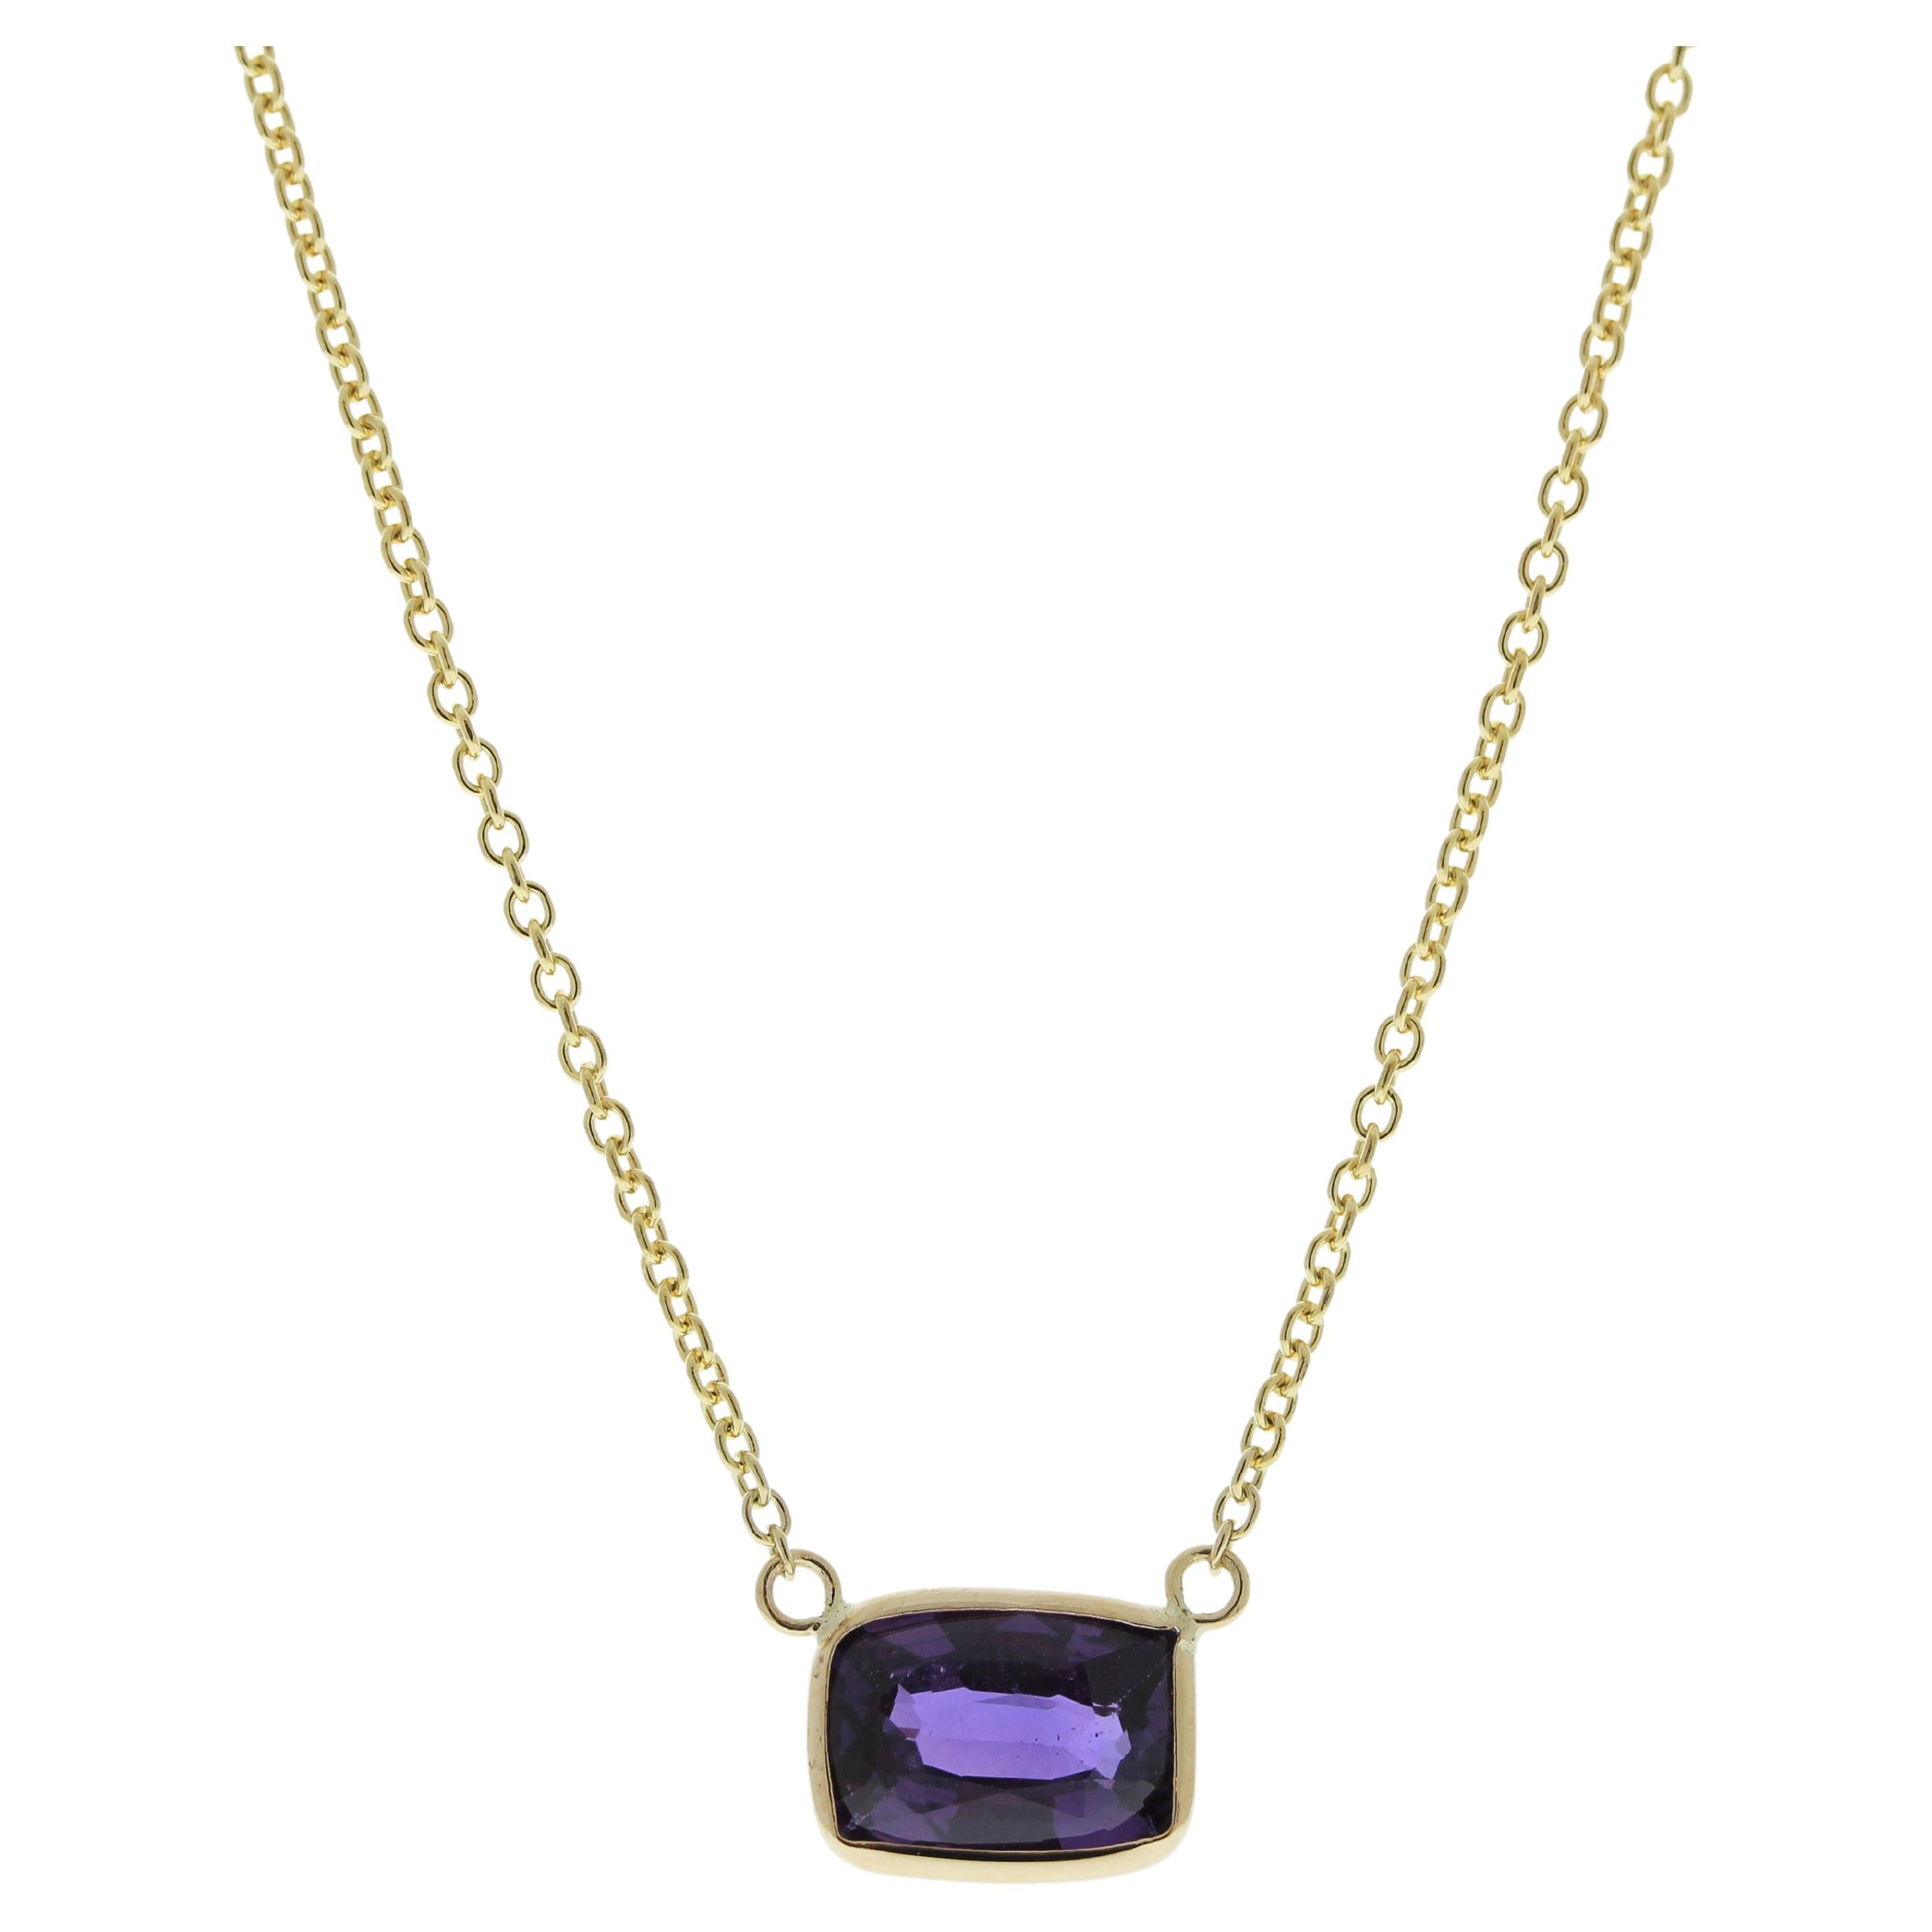 1.97 Carat Cushion Sapphire Purple Fashion Necklaces In 14k Yellow Gold For Sale